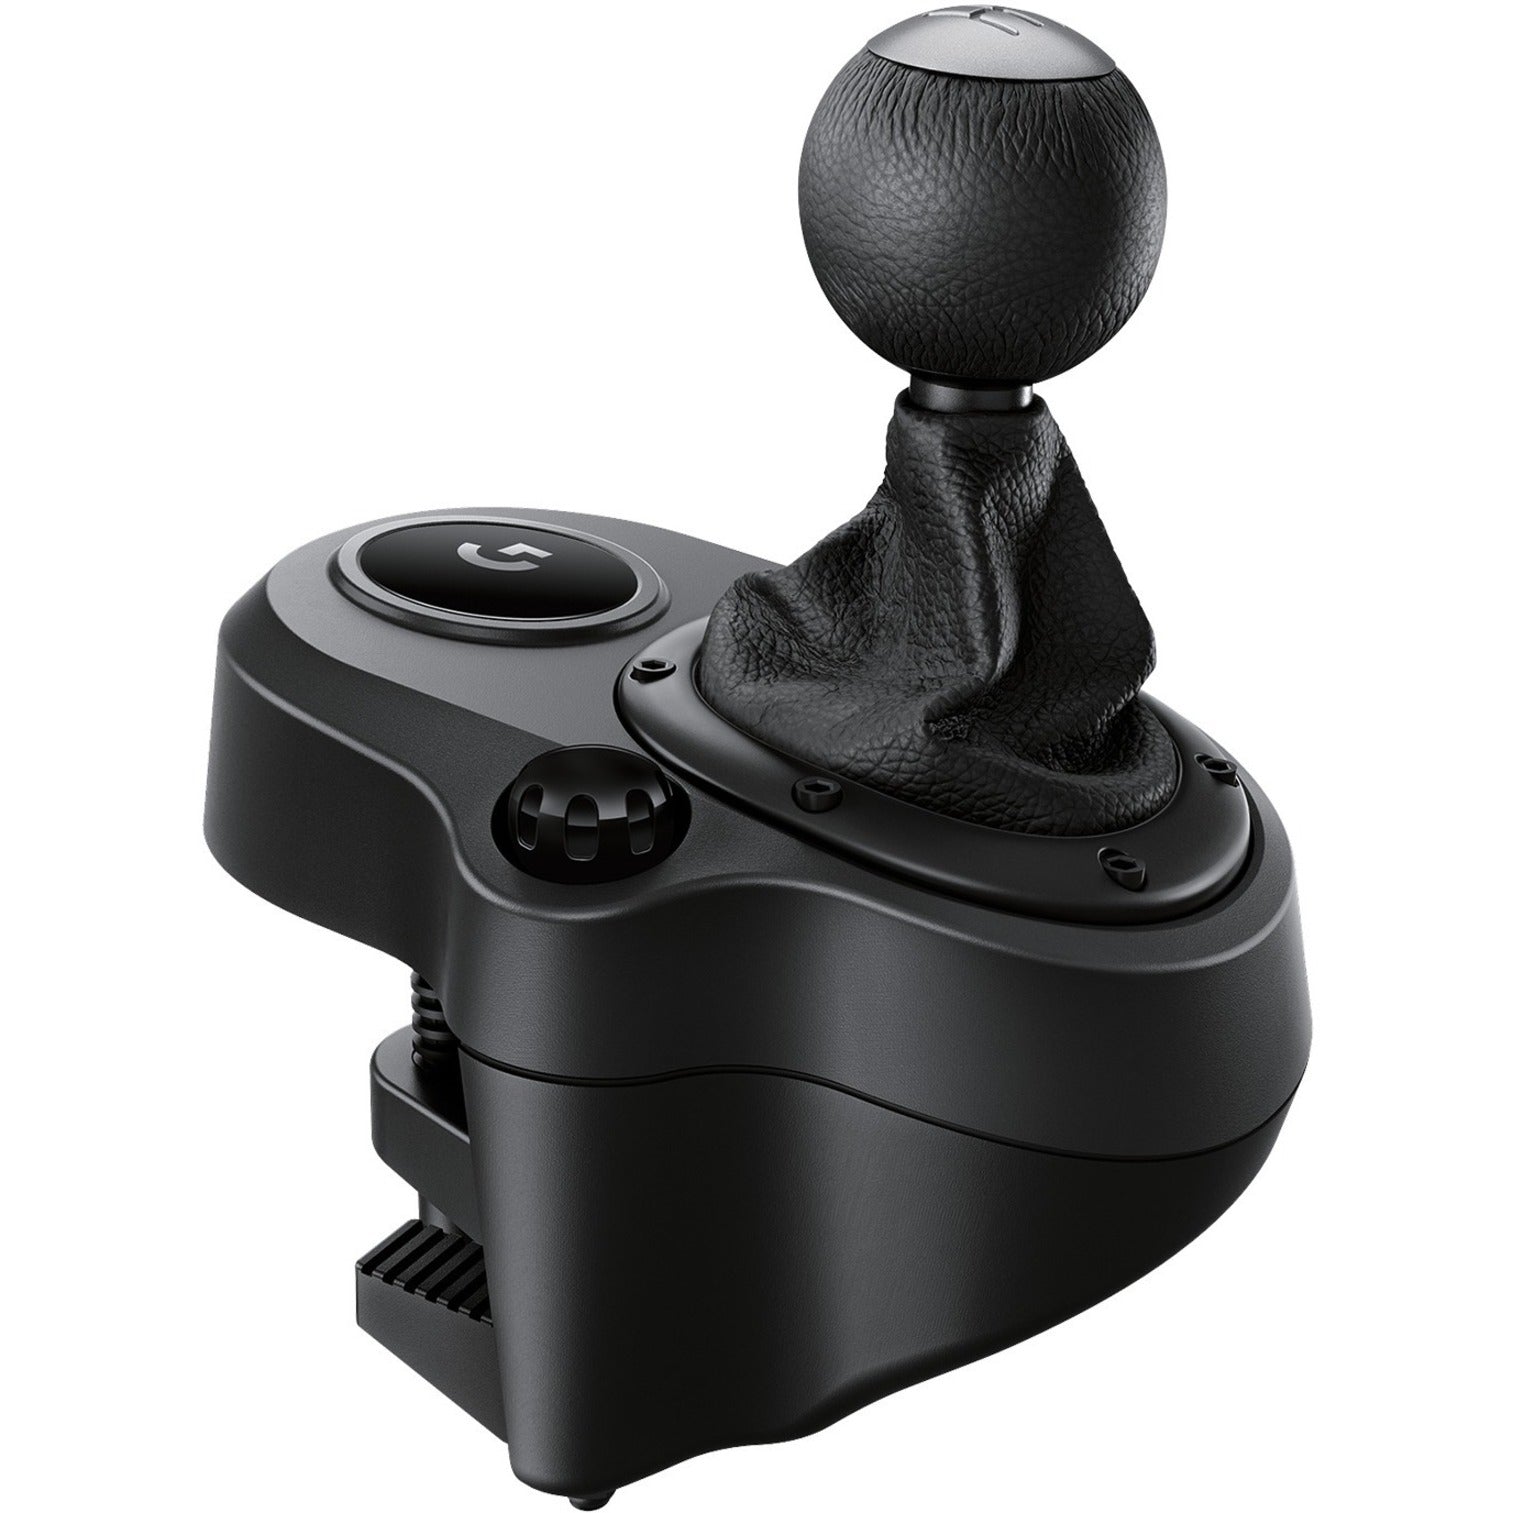 Logitech 941-000119 Driving Force Shifter For G923, G29 and G920 Racing Wheels, Gaming Gear Shifter